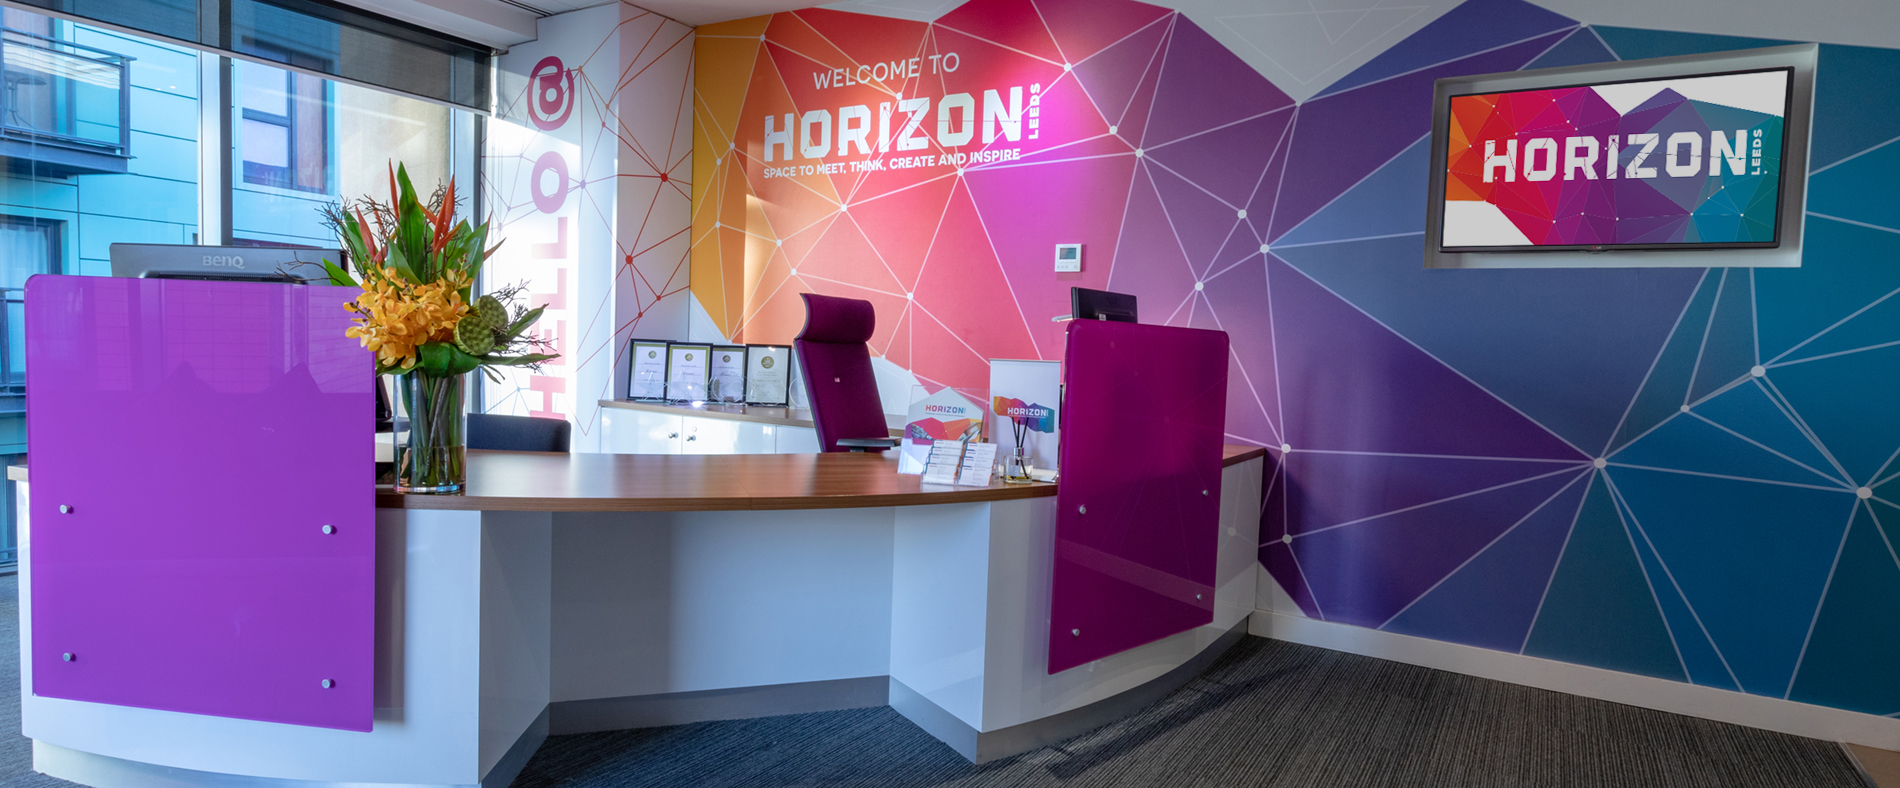 New website | Horizon Leeds | meetings and conference venue